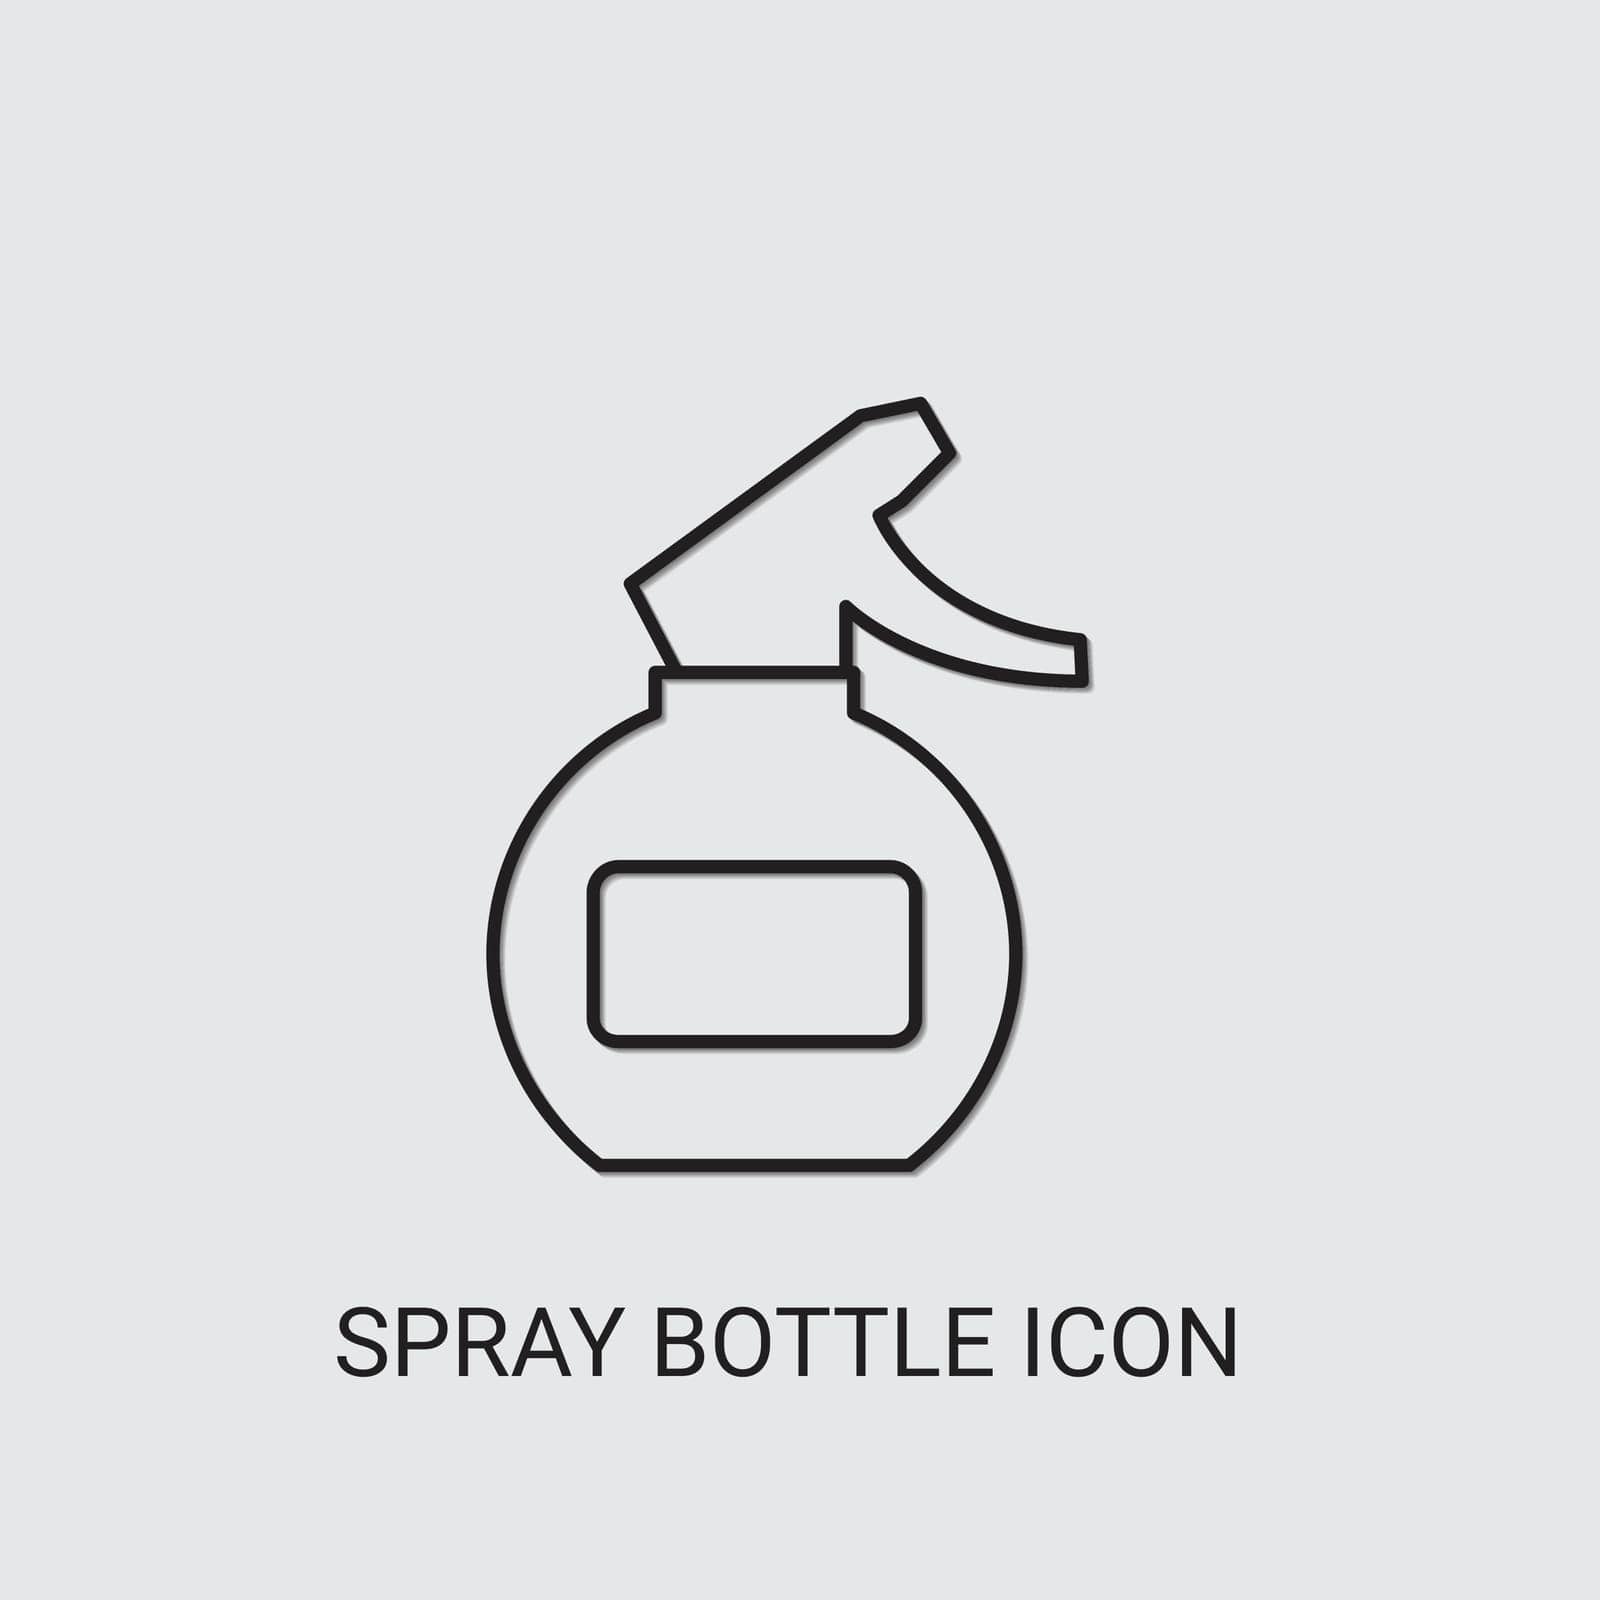 container,beauty,line,icon,isolated,lotion,bottle,detergent,white,laundry,hygiene,design,vector,barber,softener,glass,product,set,spray,cleaner,health,packaging,clean,water,face,plastic,liquid,chemical,background,fabric,household,illustration,fresh,soap by ogqcorp